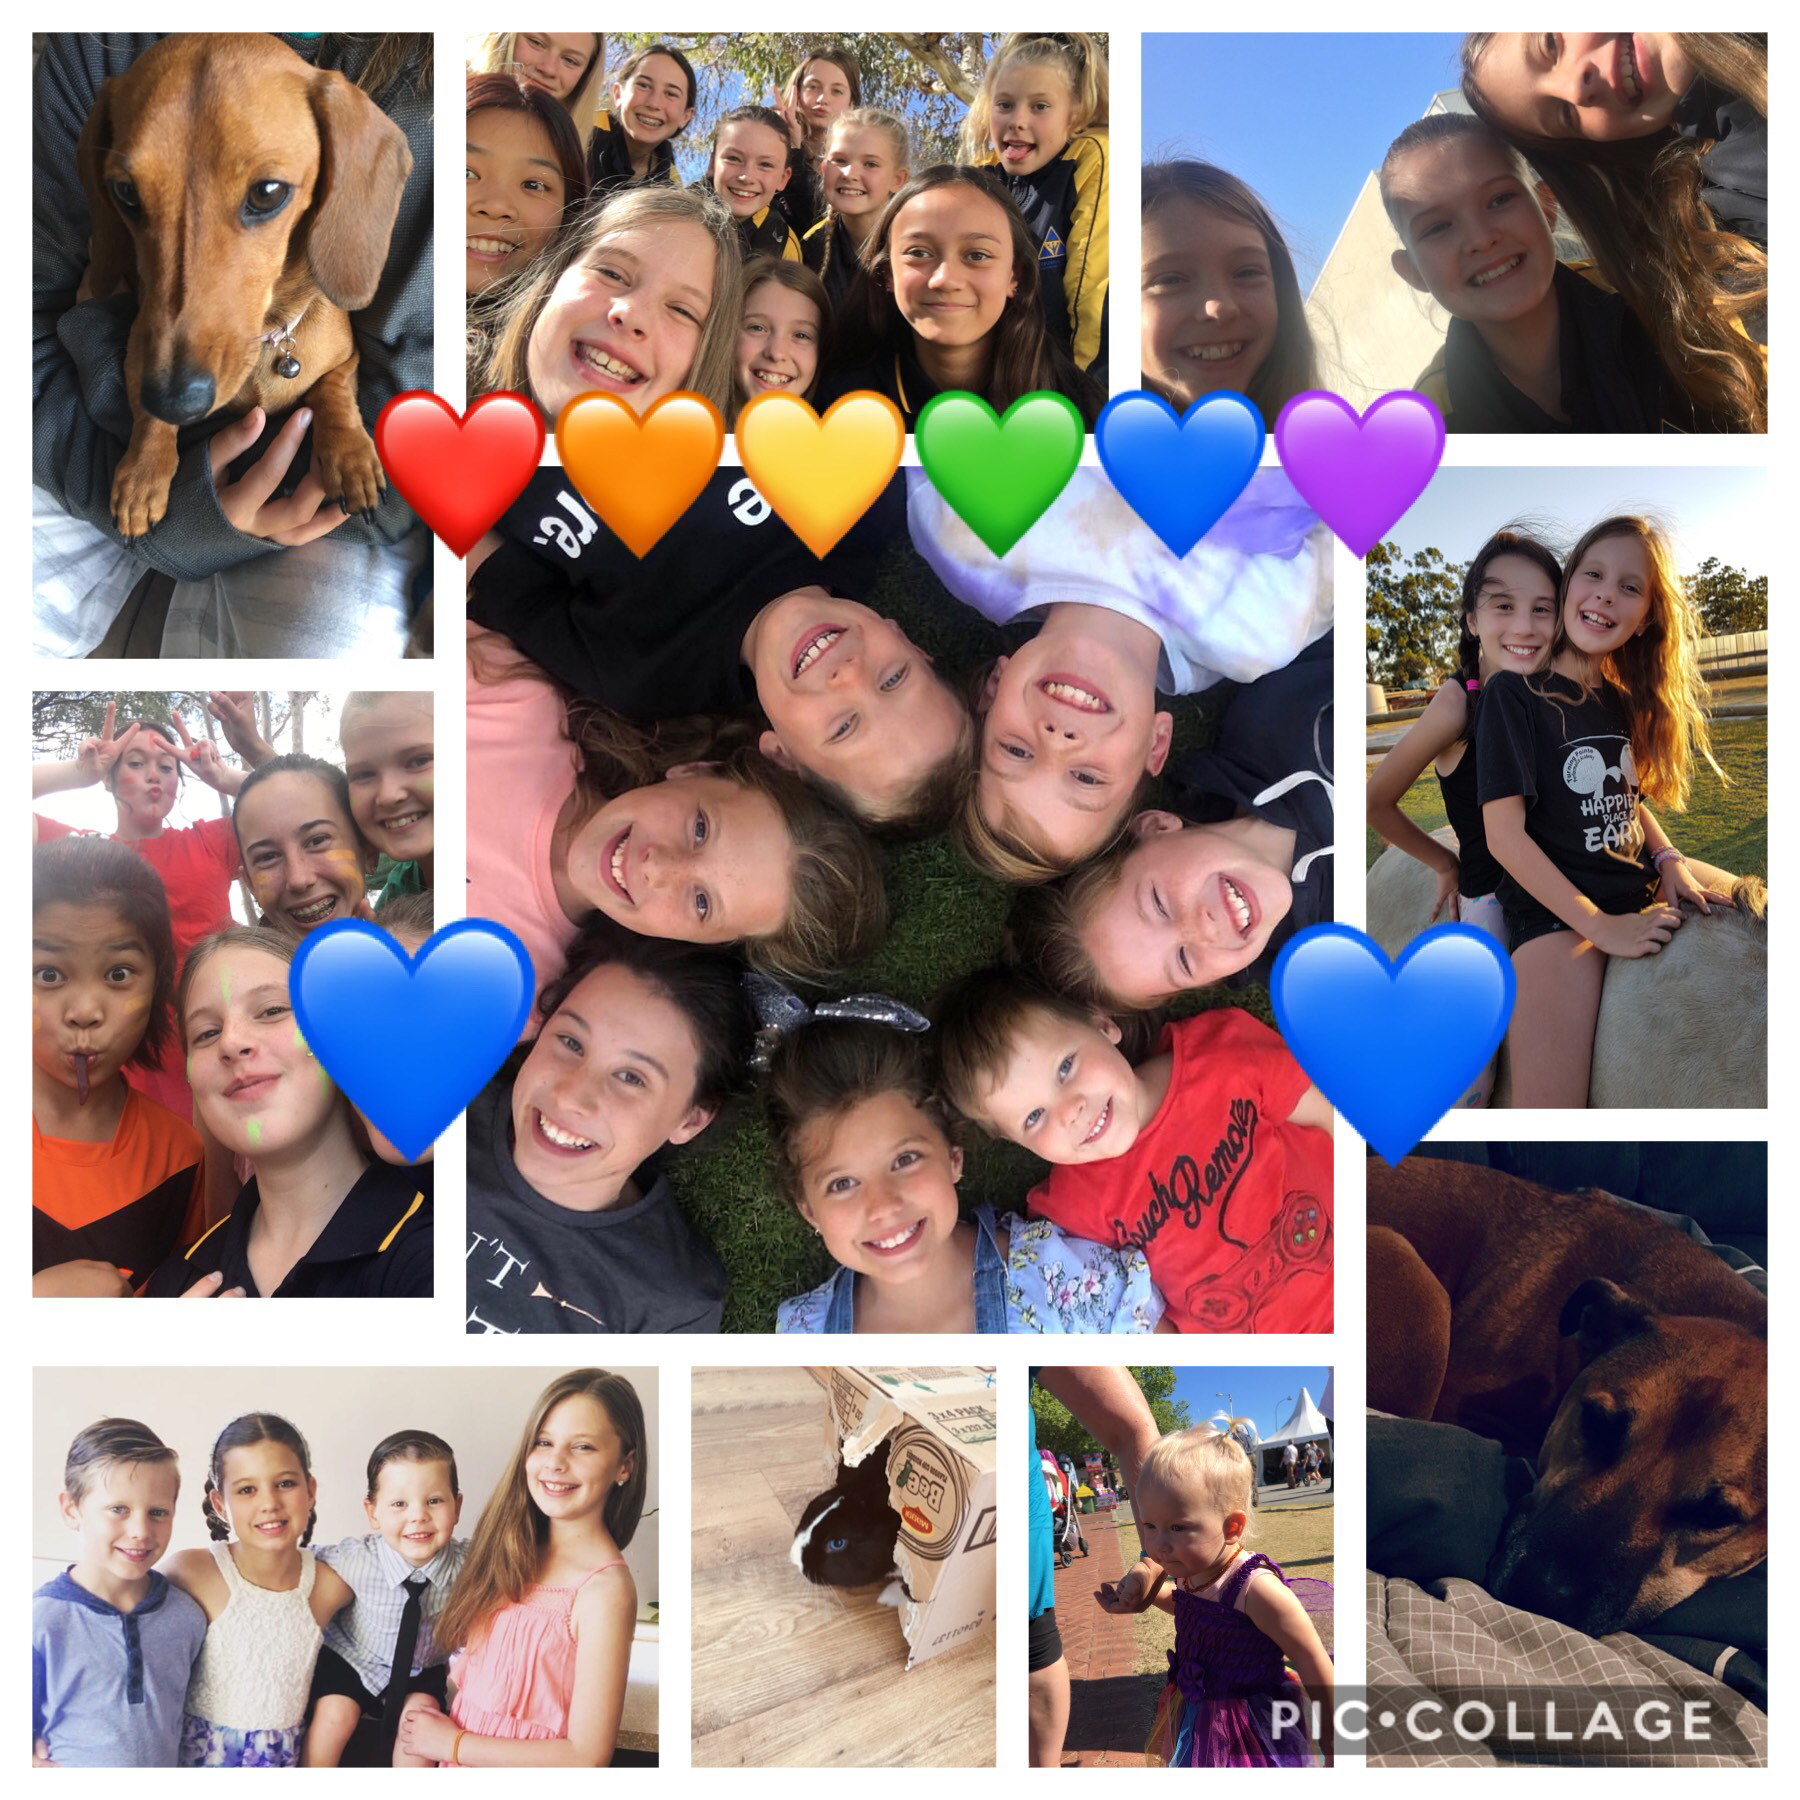 Family and friends will be the most important thing in your life 
Cherish them with your life and trust them like you can’t trust anyone else
I love u guys
❤️❤️🧡🧡💛💛💚💚💙💙💜💜